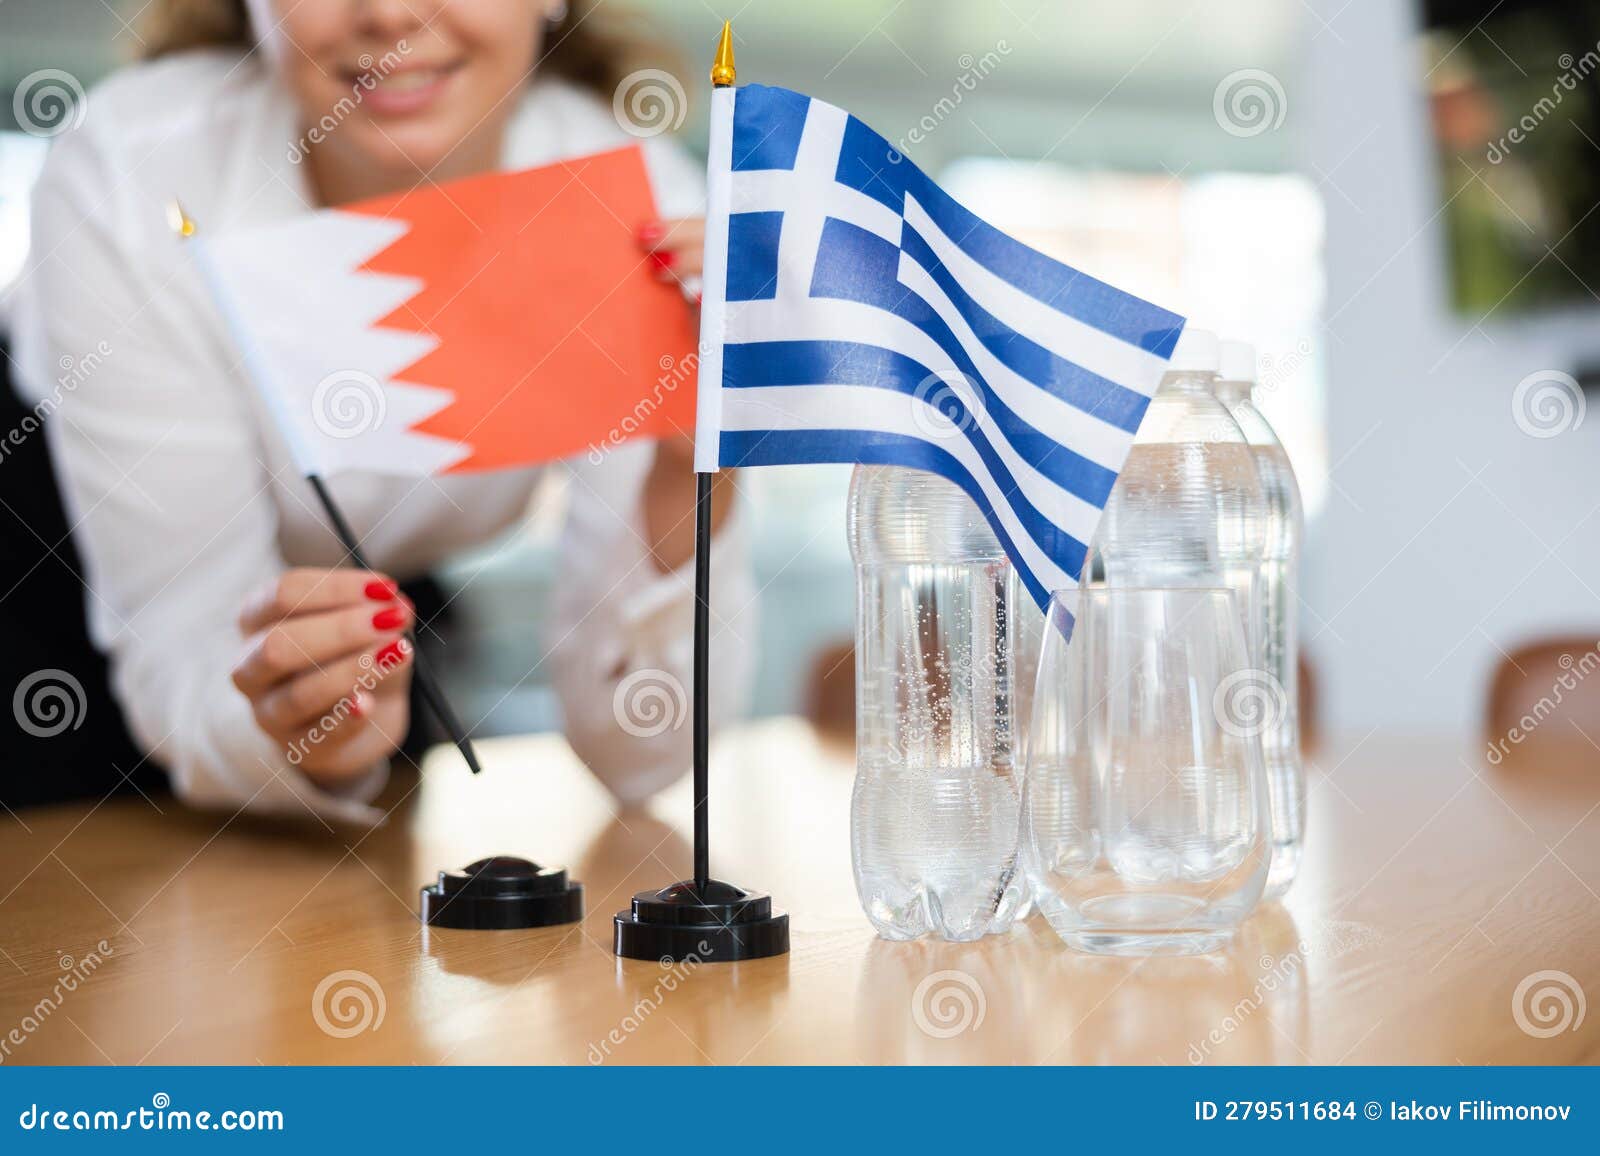 unrecognizable girl sets midget flags of greece and bahrein before international negotiations